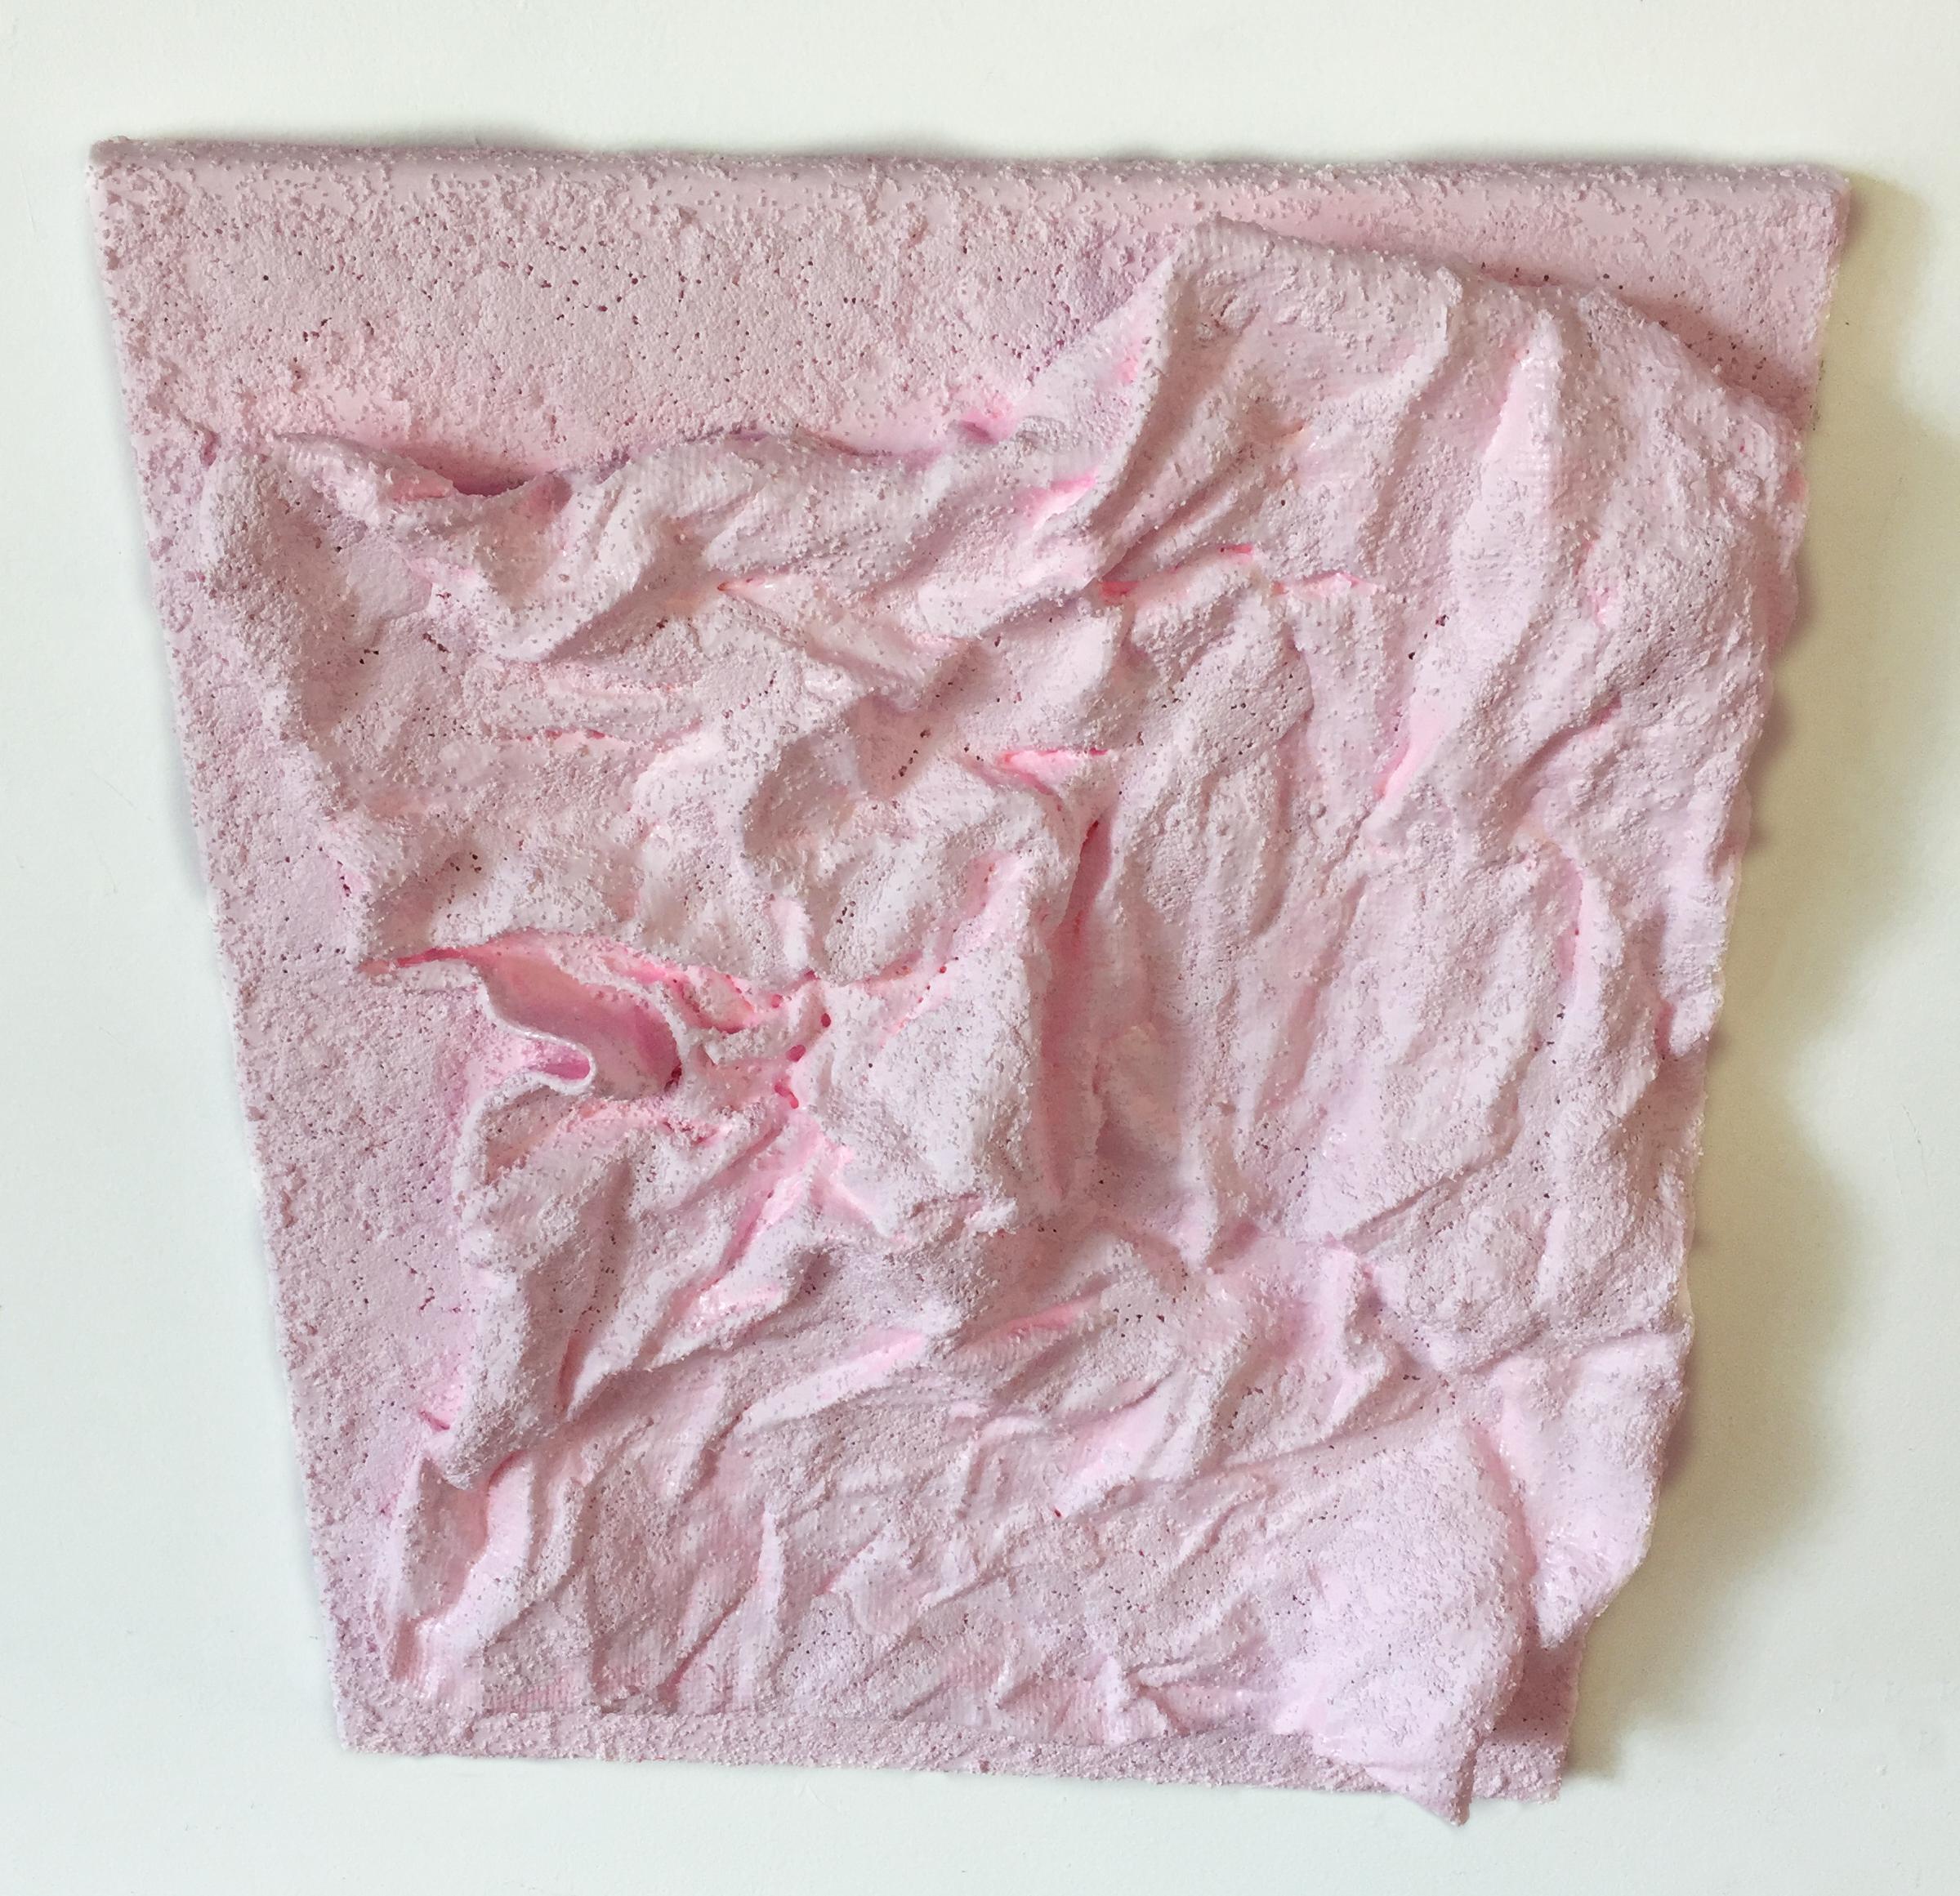 Baby Pink Folds (wall sculpture, texture painting, fabric collage, textured) - Abstract Mixed Media Art by Chloe Hedden